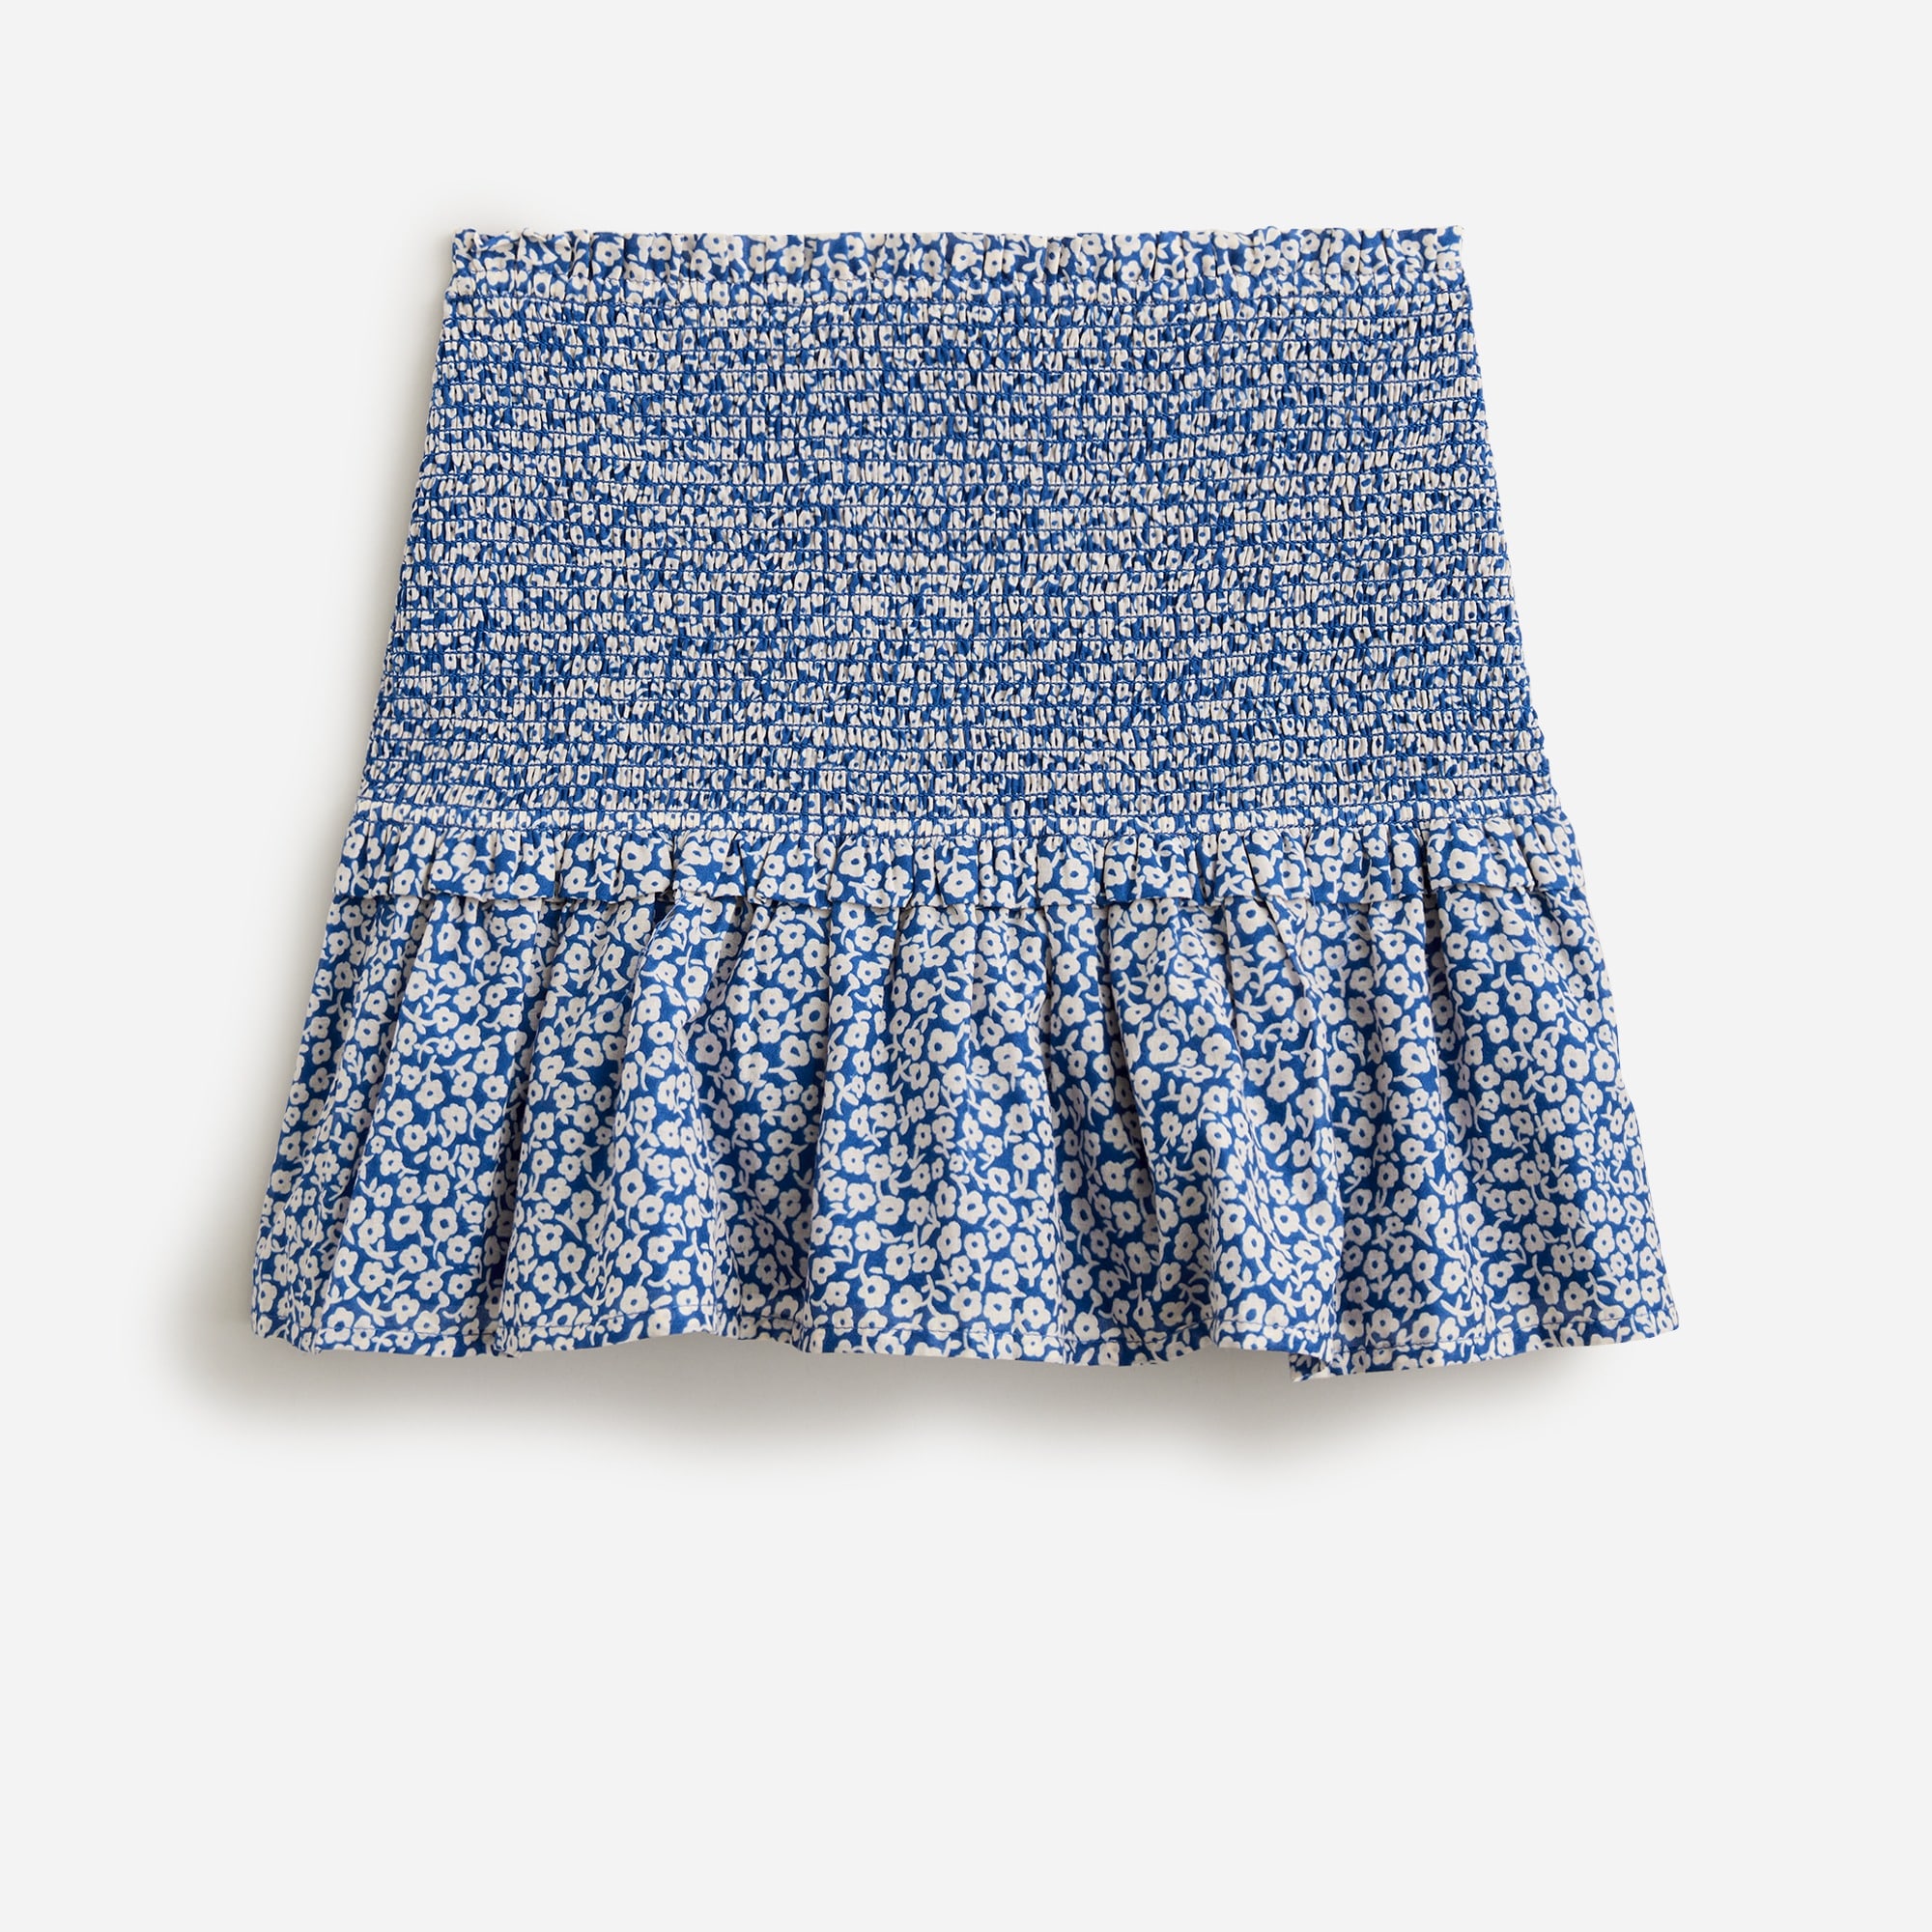  Girls' smocked skirt in floral cotton voile